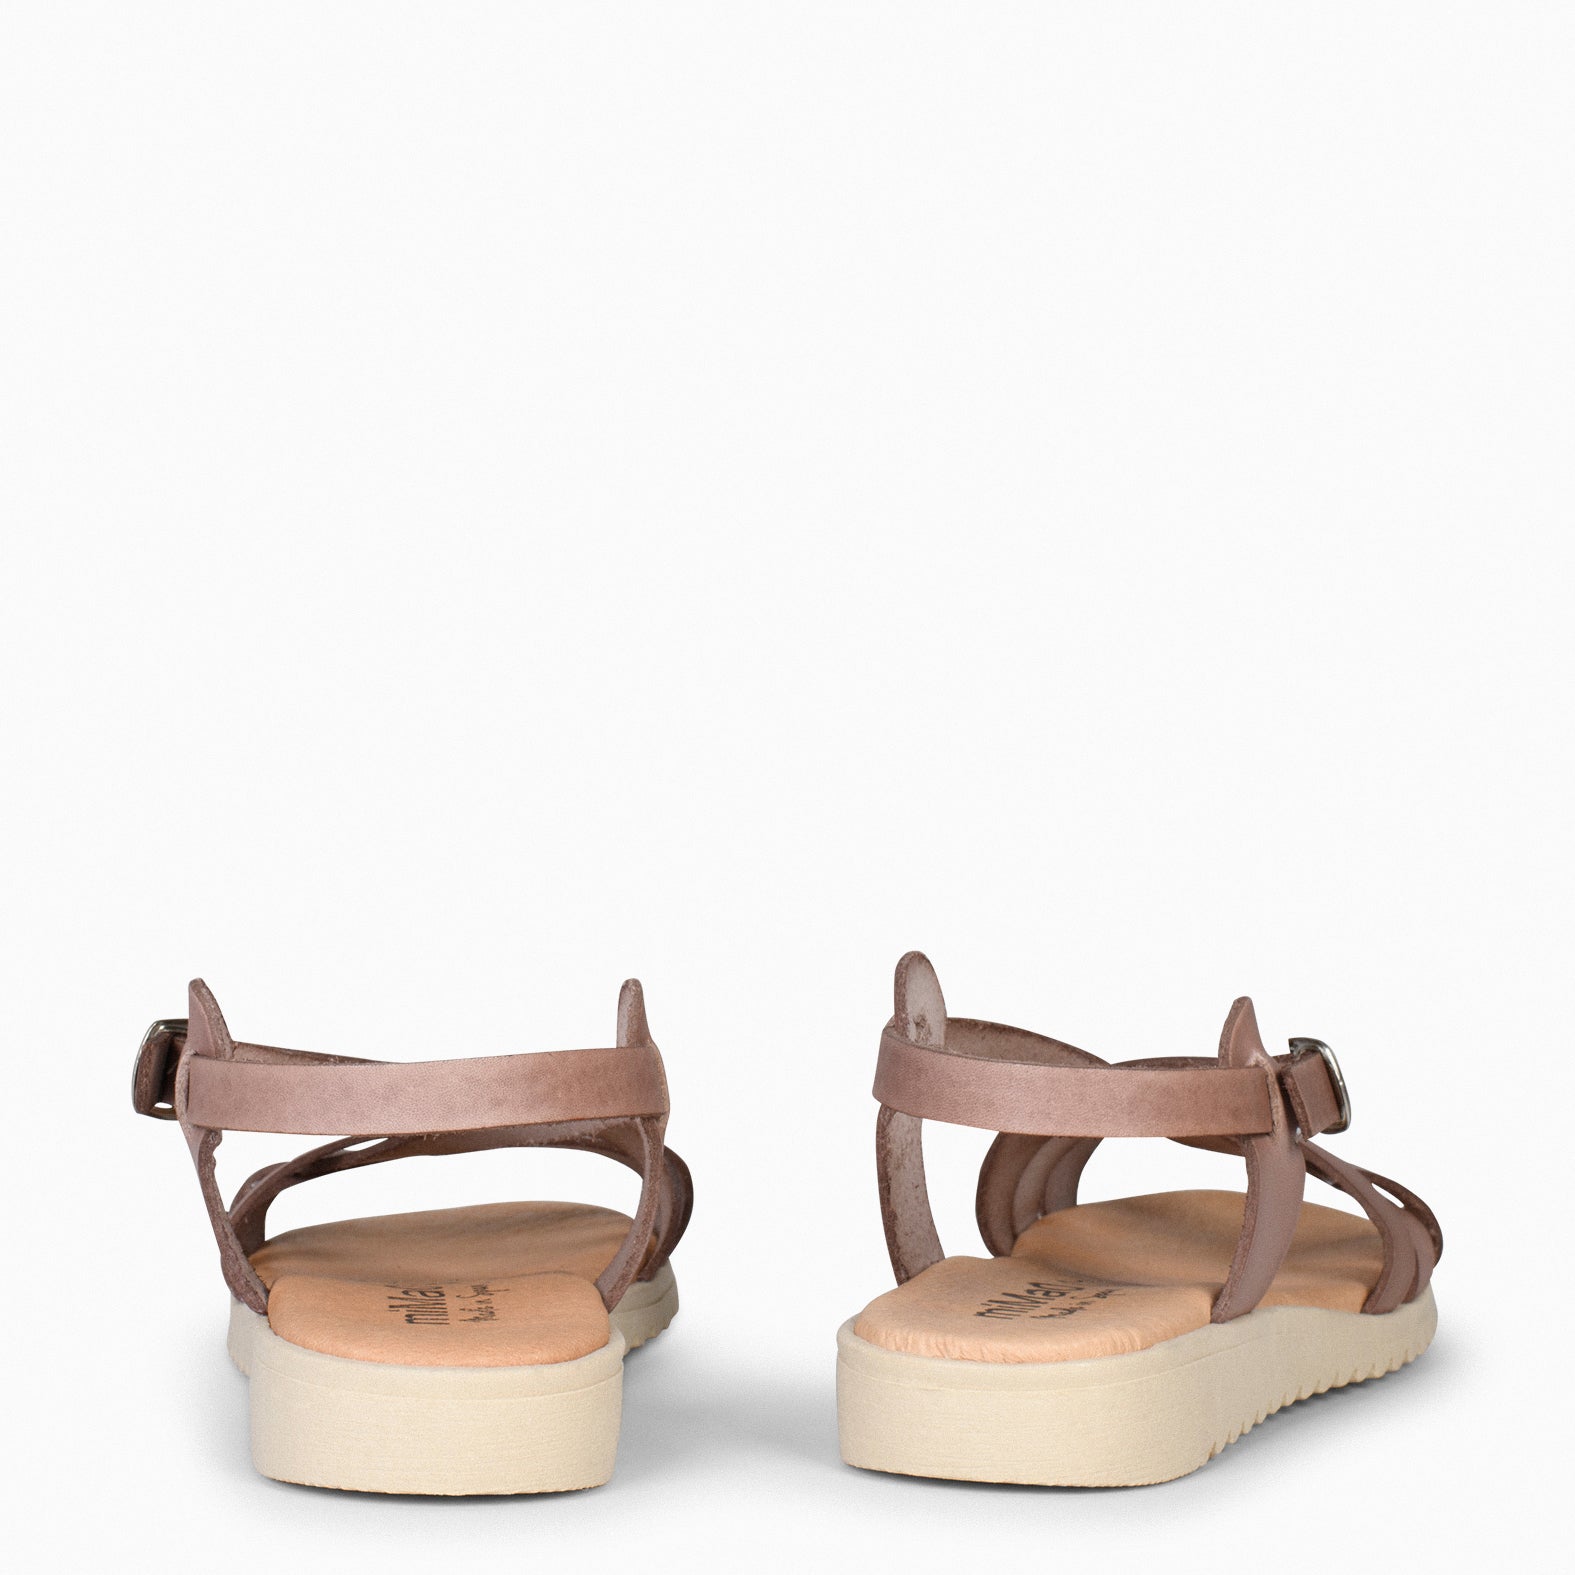 SPIRIT – TAUPE Flat sandal with crossed strap